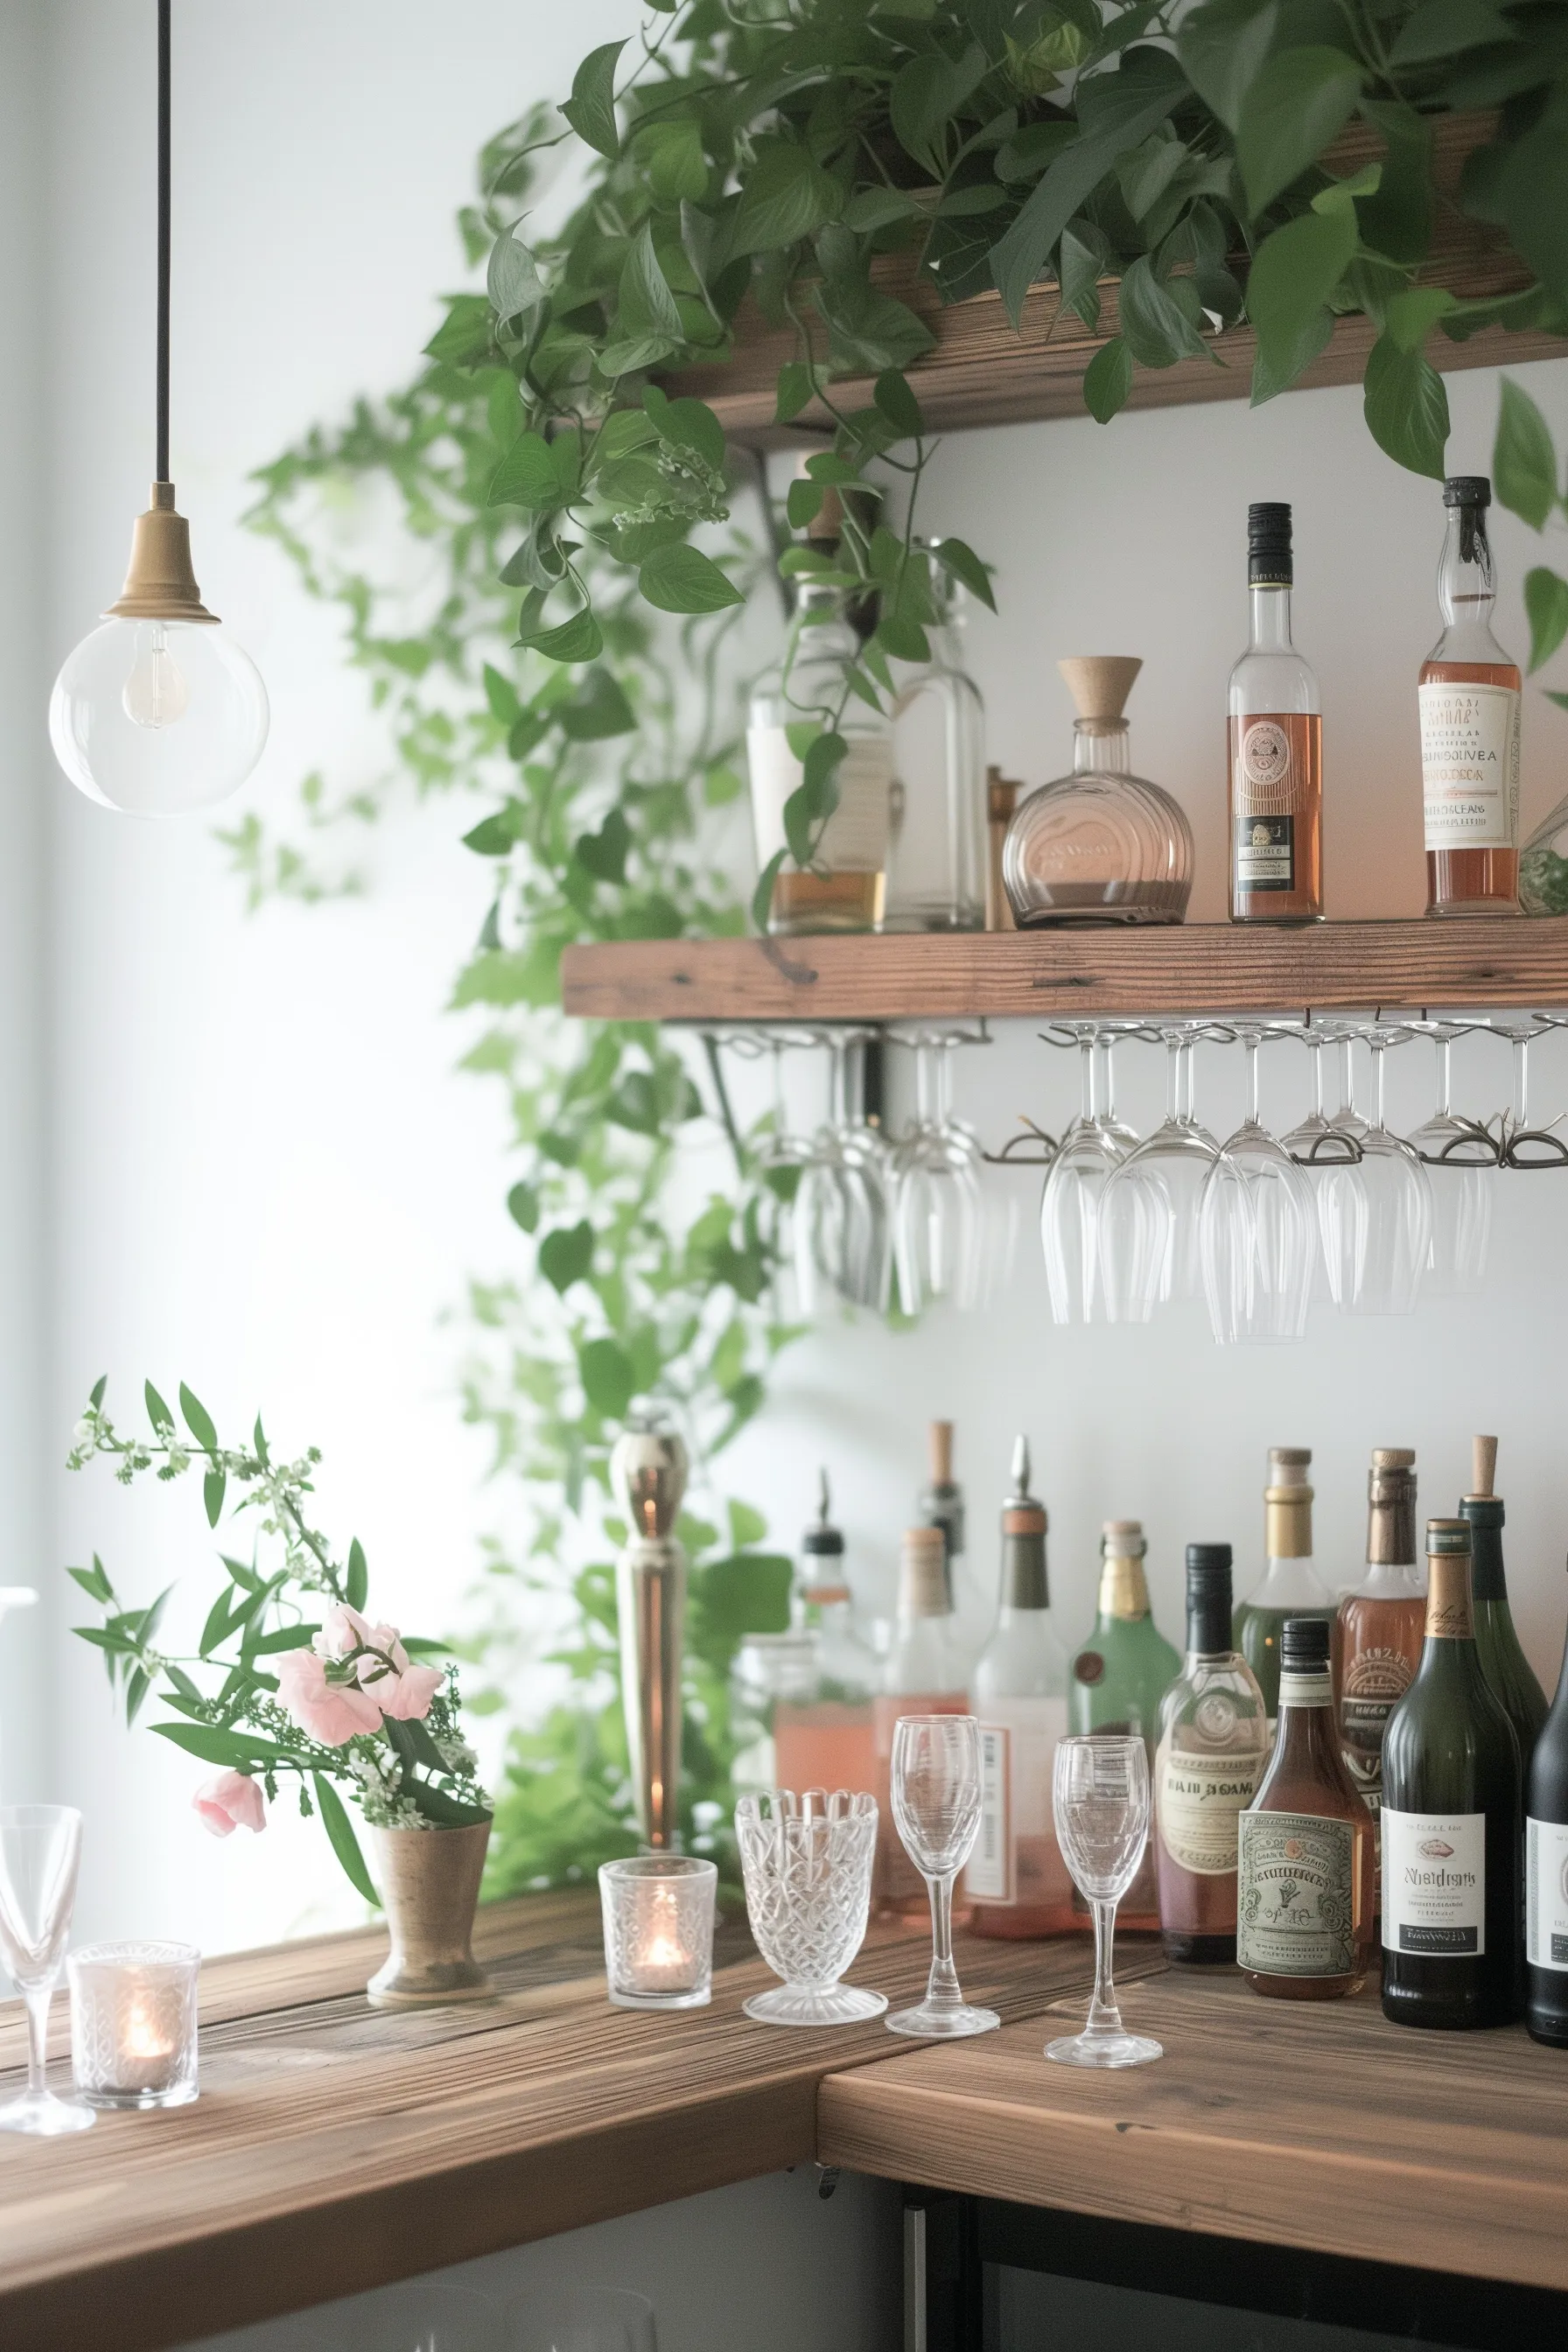 A DIY bar shelf gold accents and plants